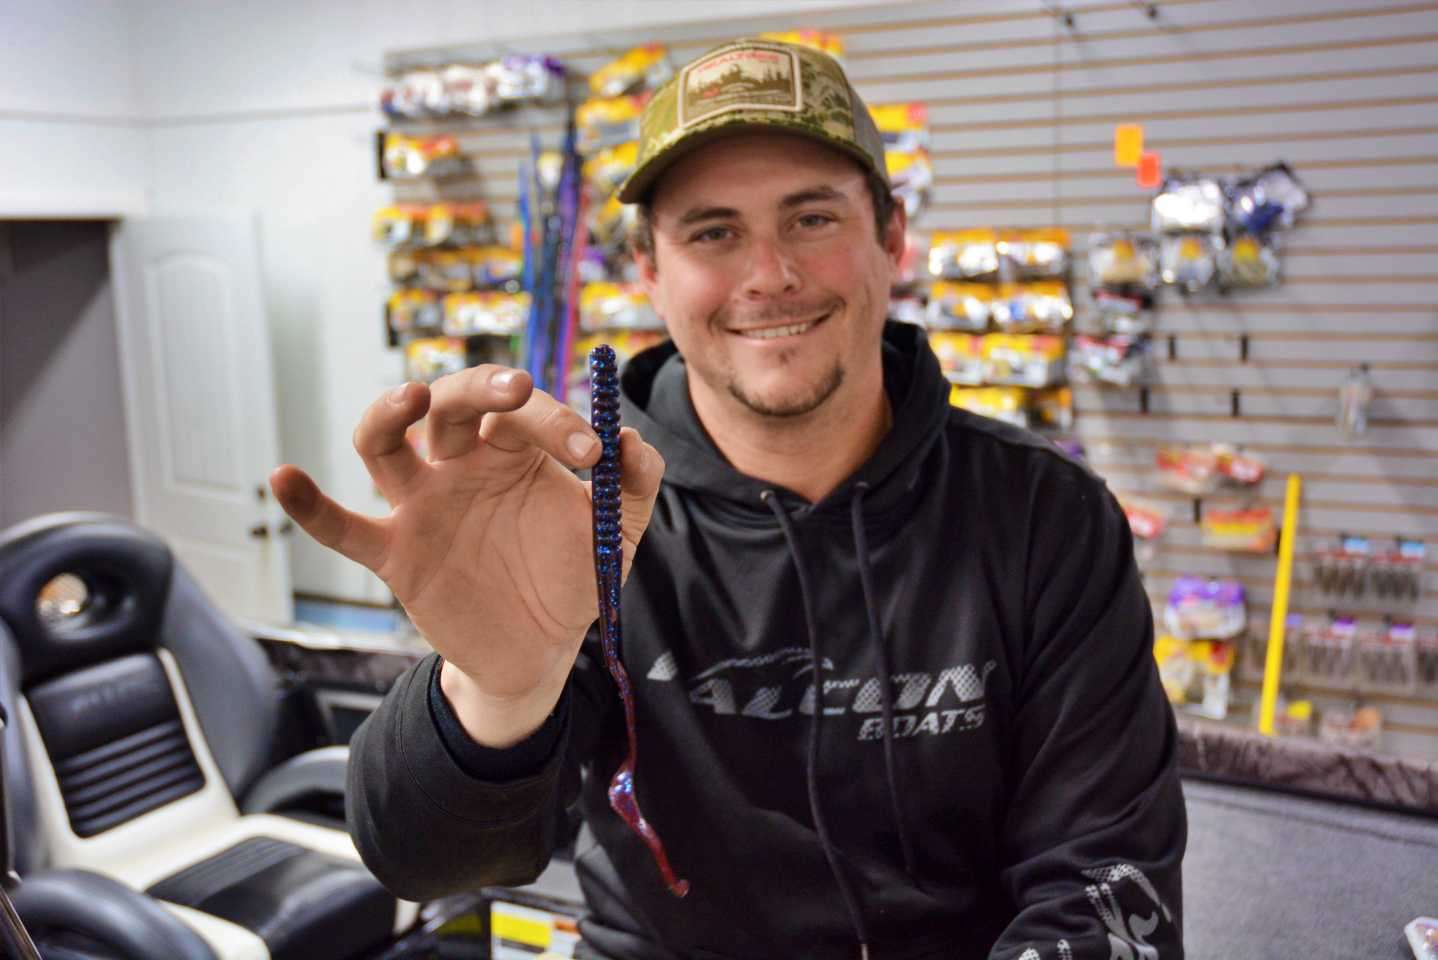 Next up is an all-time favorite. Itâs a Berkley PowerBait Power Worm. âThe ribbon-tail design makes it ideal for a swimming action, and you can fish it shallow, deep, over suspended fish, just about anywhere,â he said.   